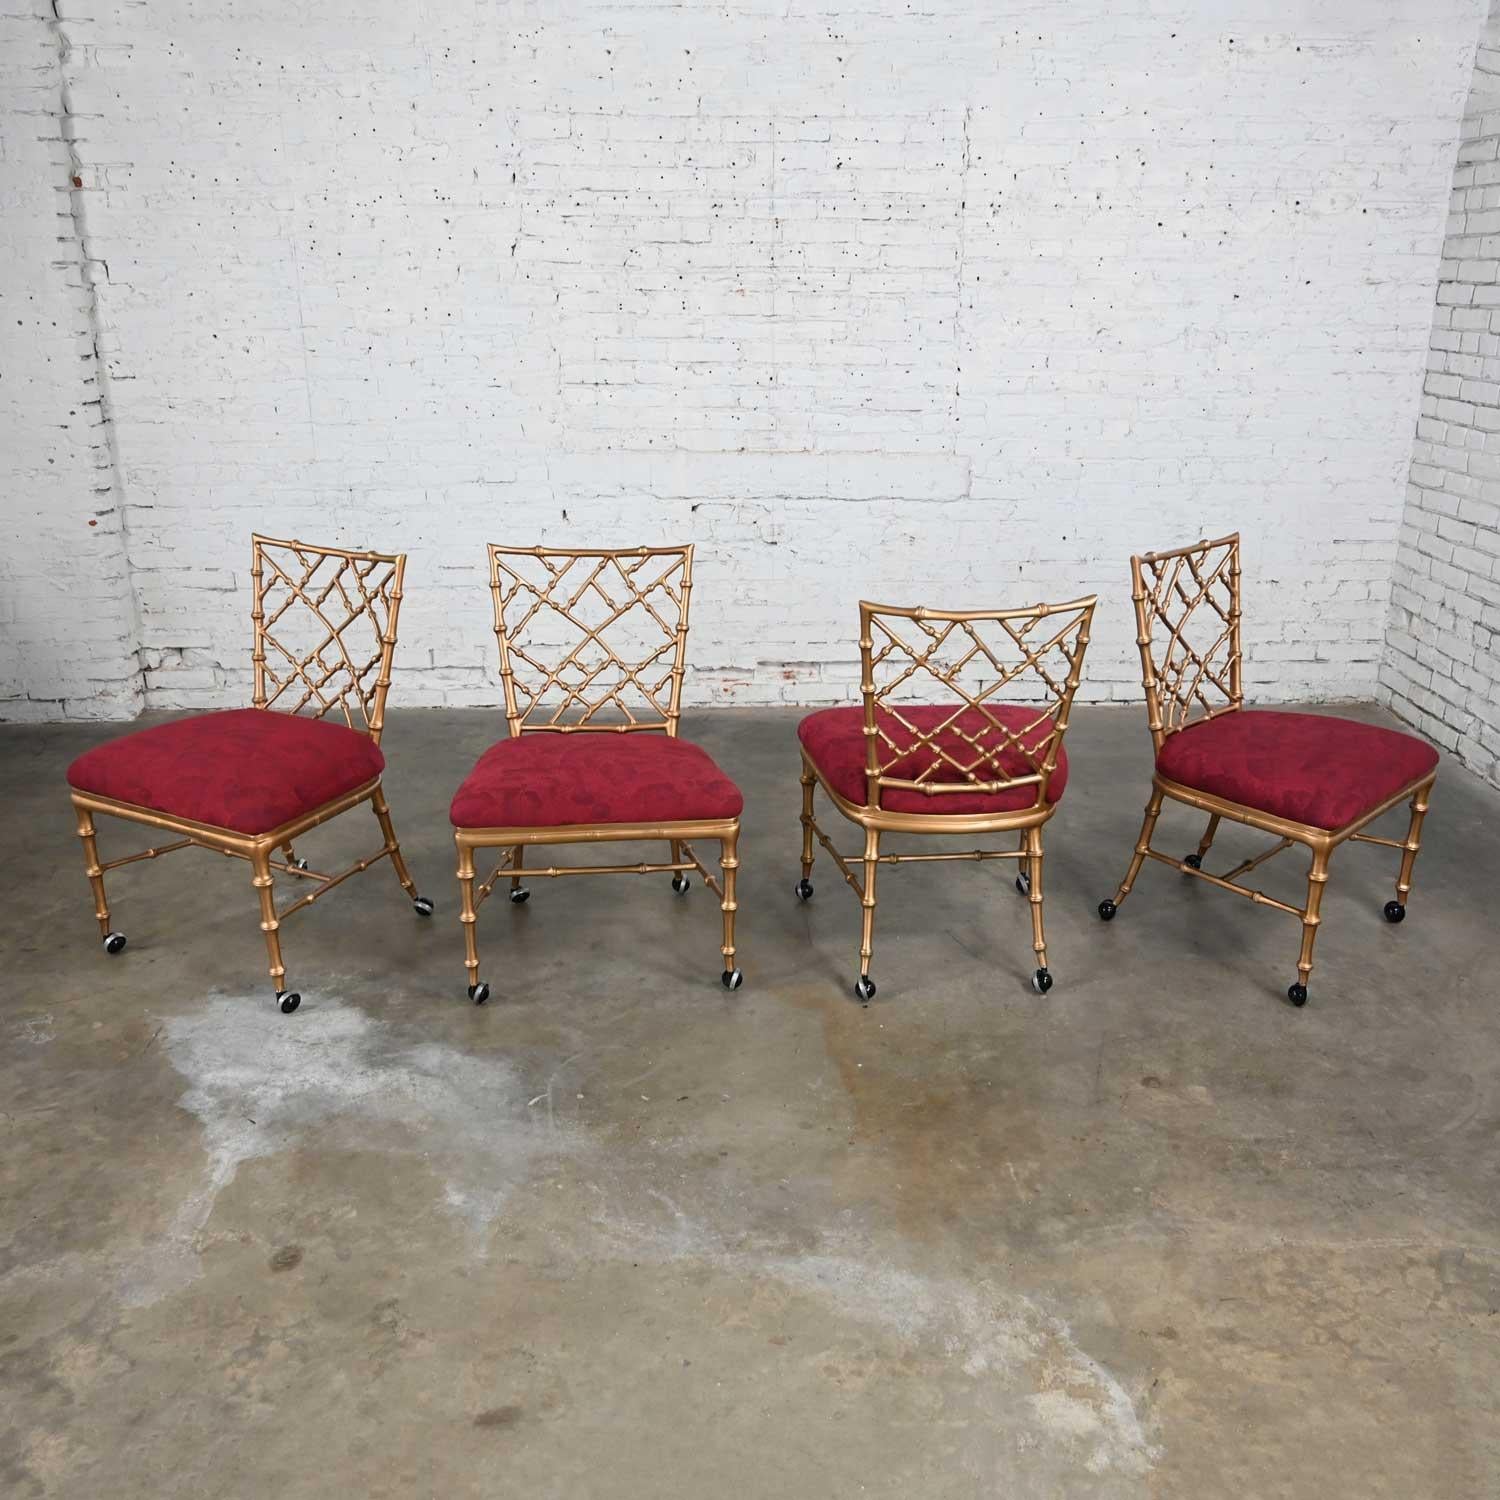 20th Century Chinoiserie Faux Bamboo Gold Painted Metal Chairs Rolling Style Phyllis Morris For Sale